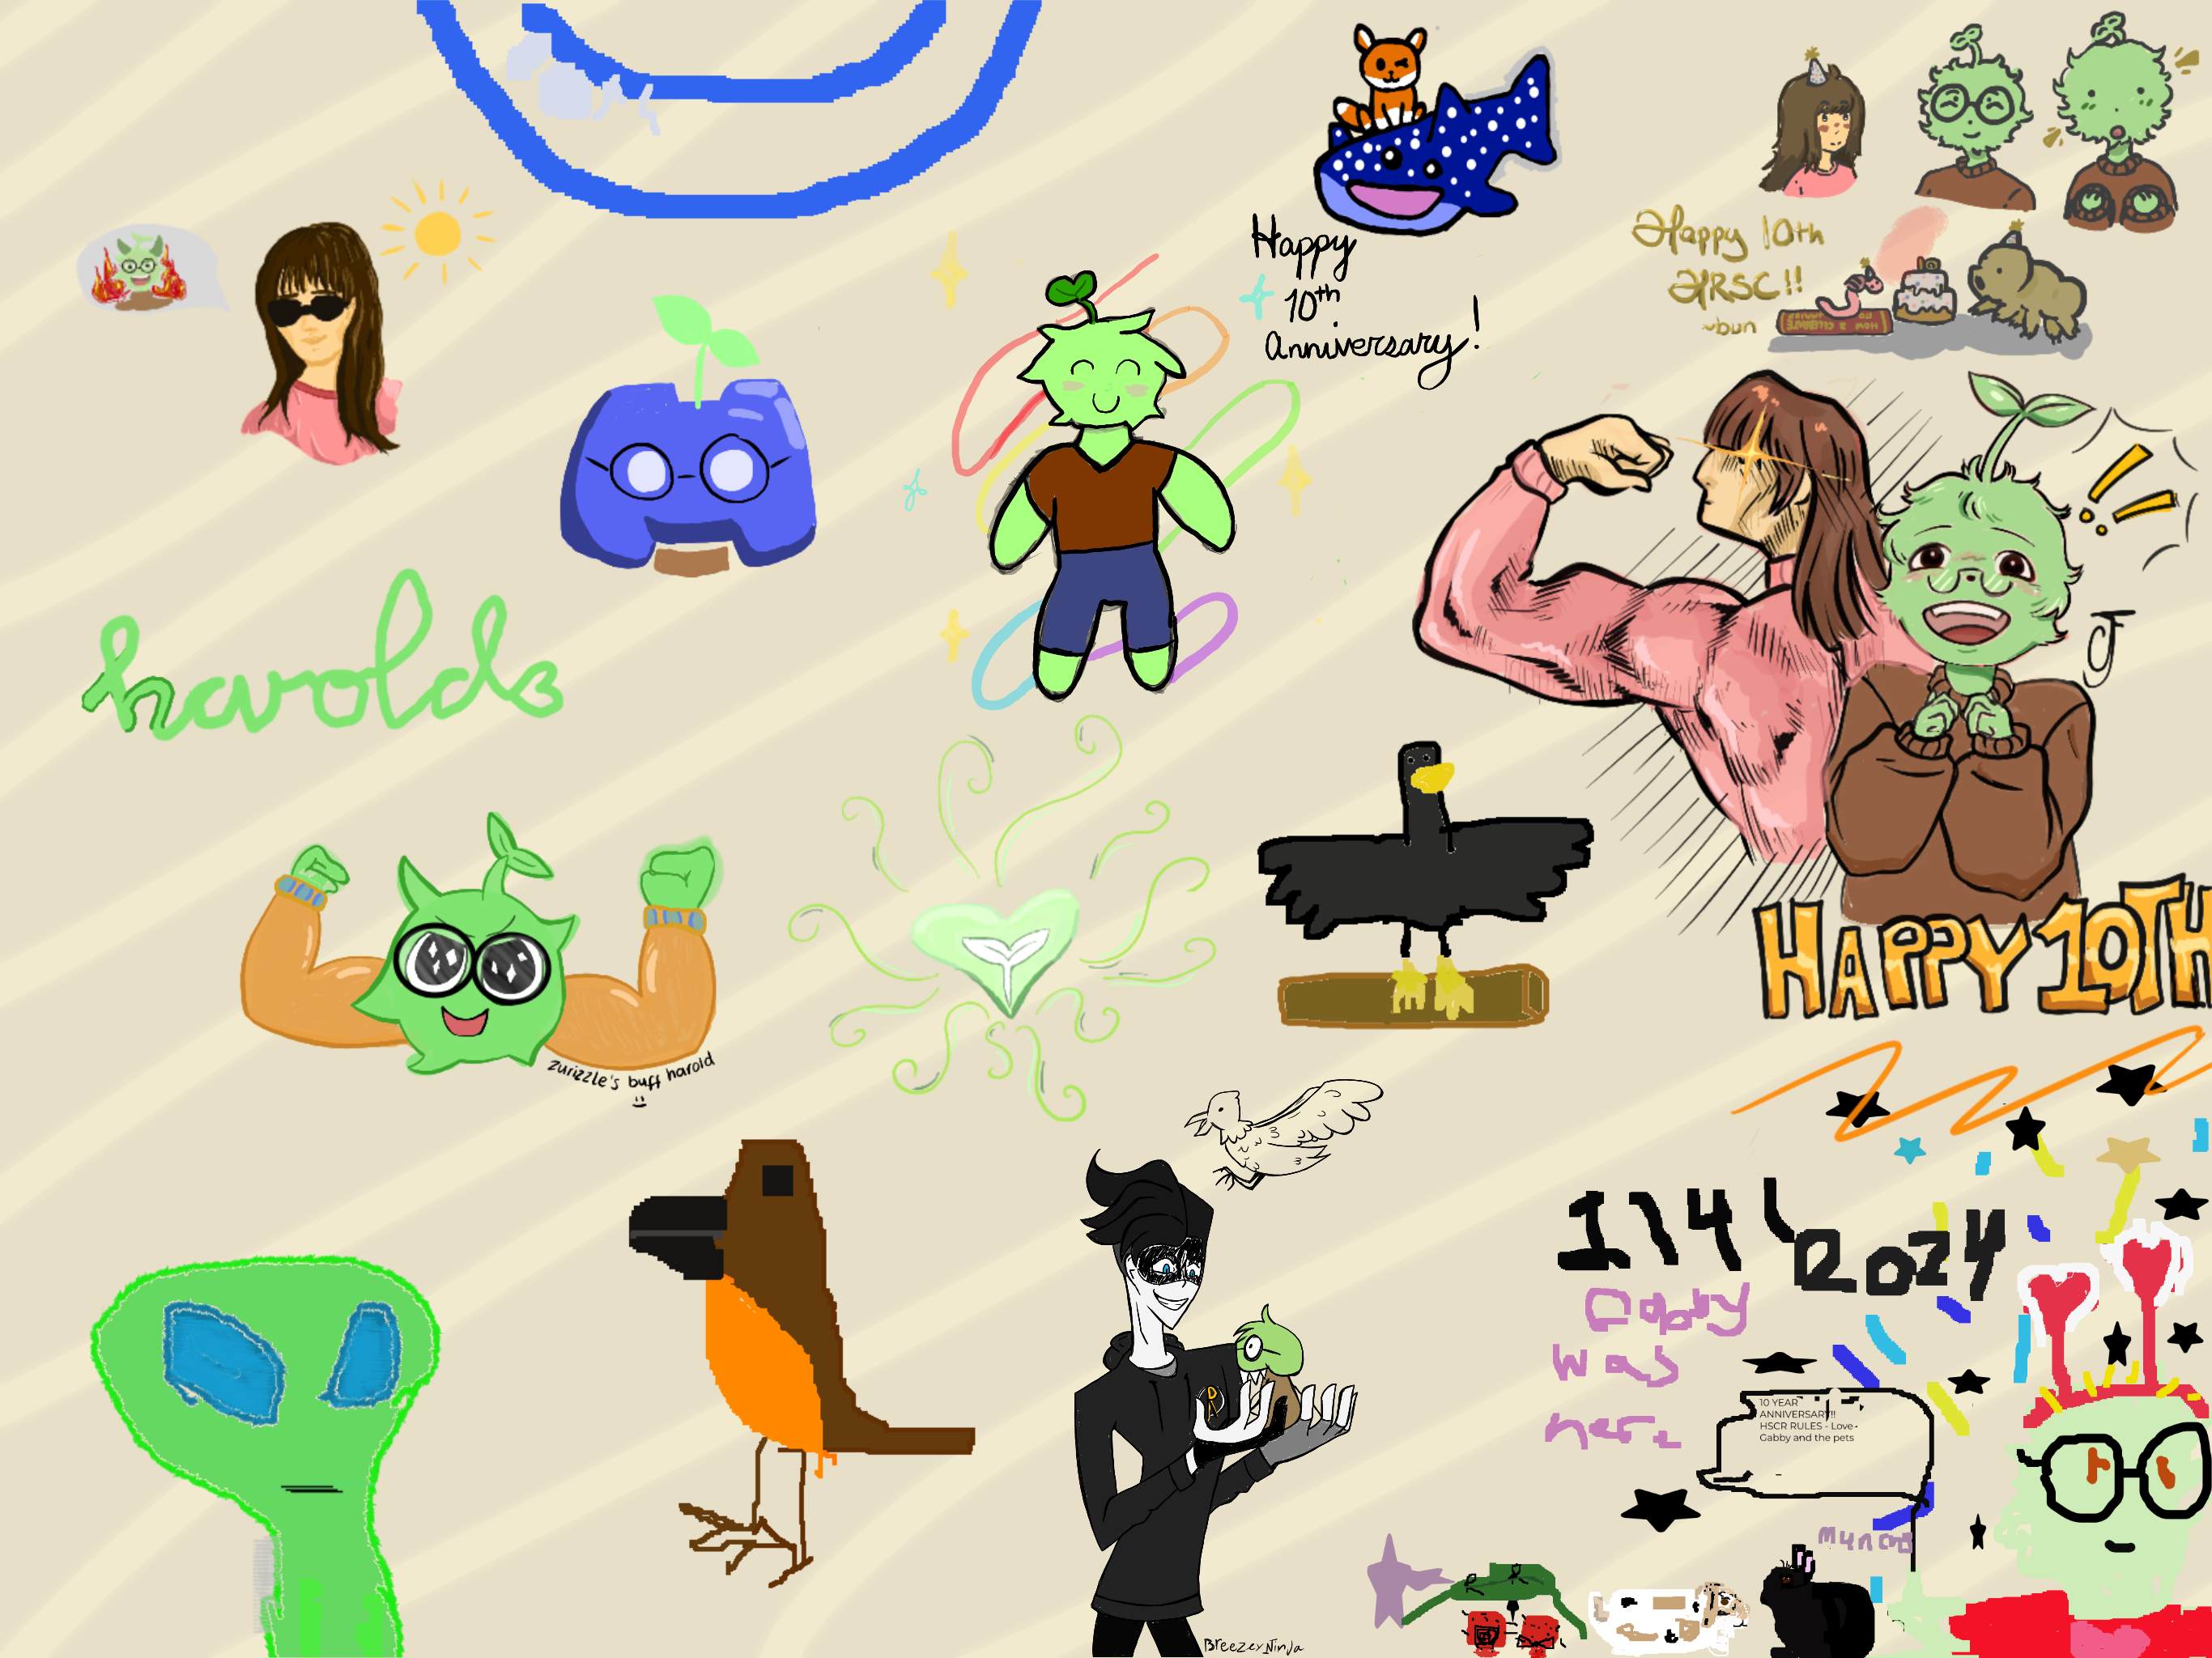 HSRC’s 10th anniversary art by BreezeyNinja, Gabby, dreamiebuns, Claire, Anne, and others!